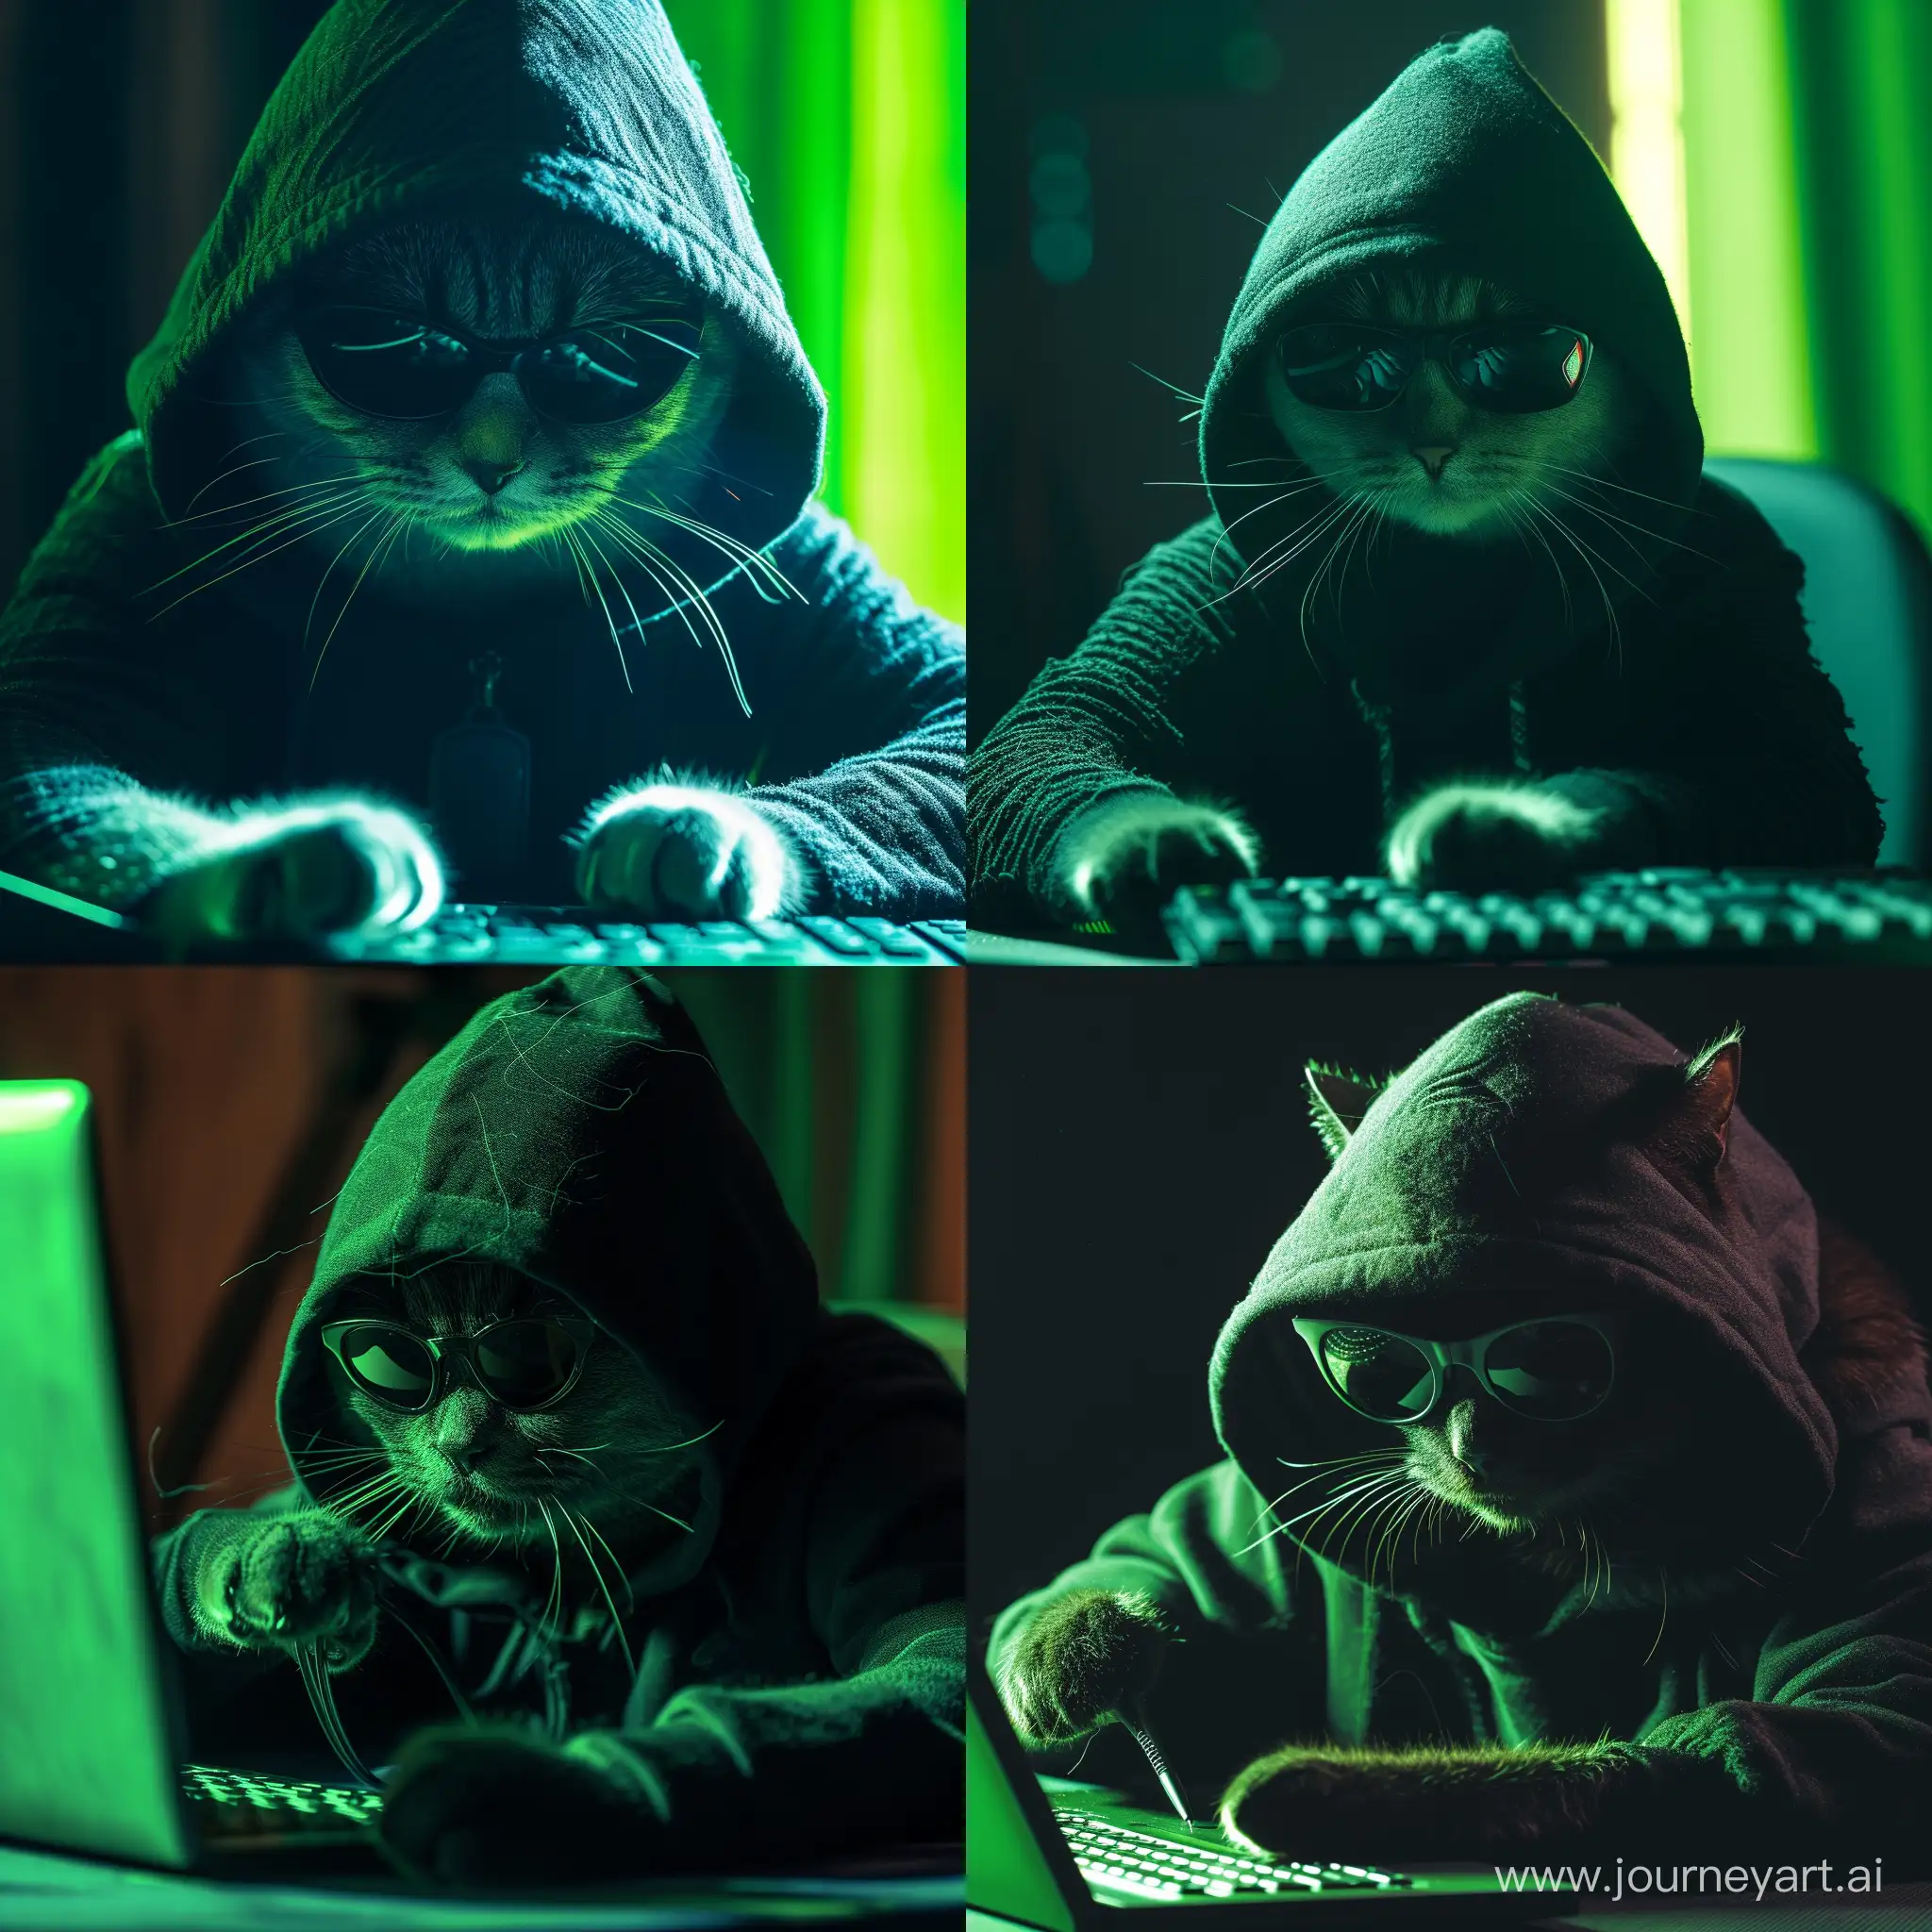 Cat hacker in black hood  sitting an the table and hacking , sun black glasses, green lighting